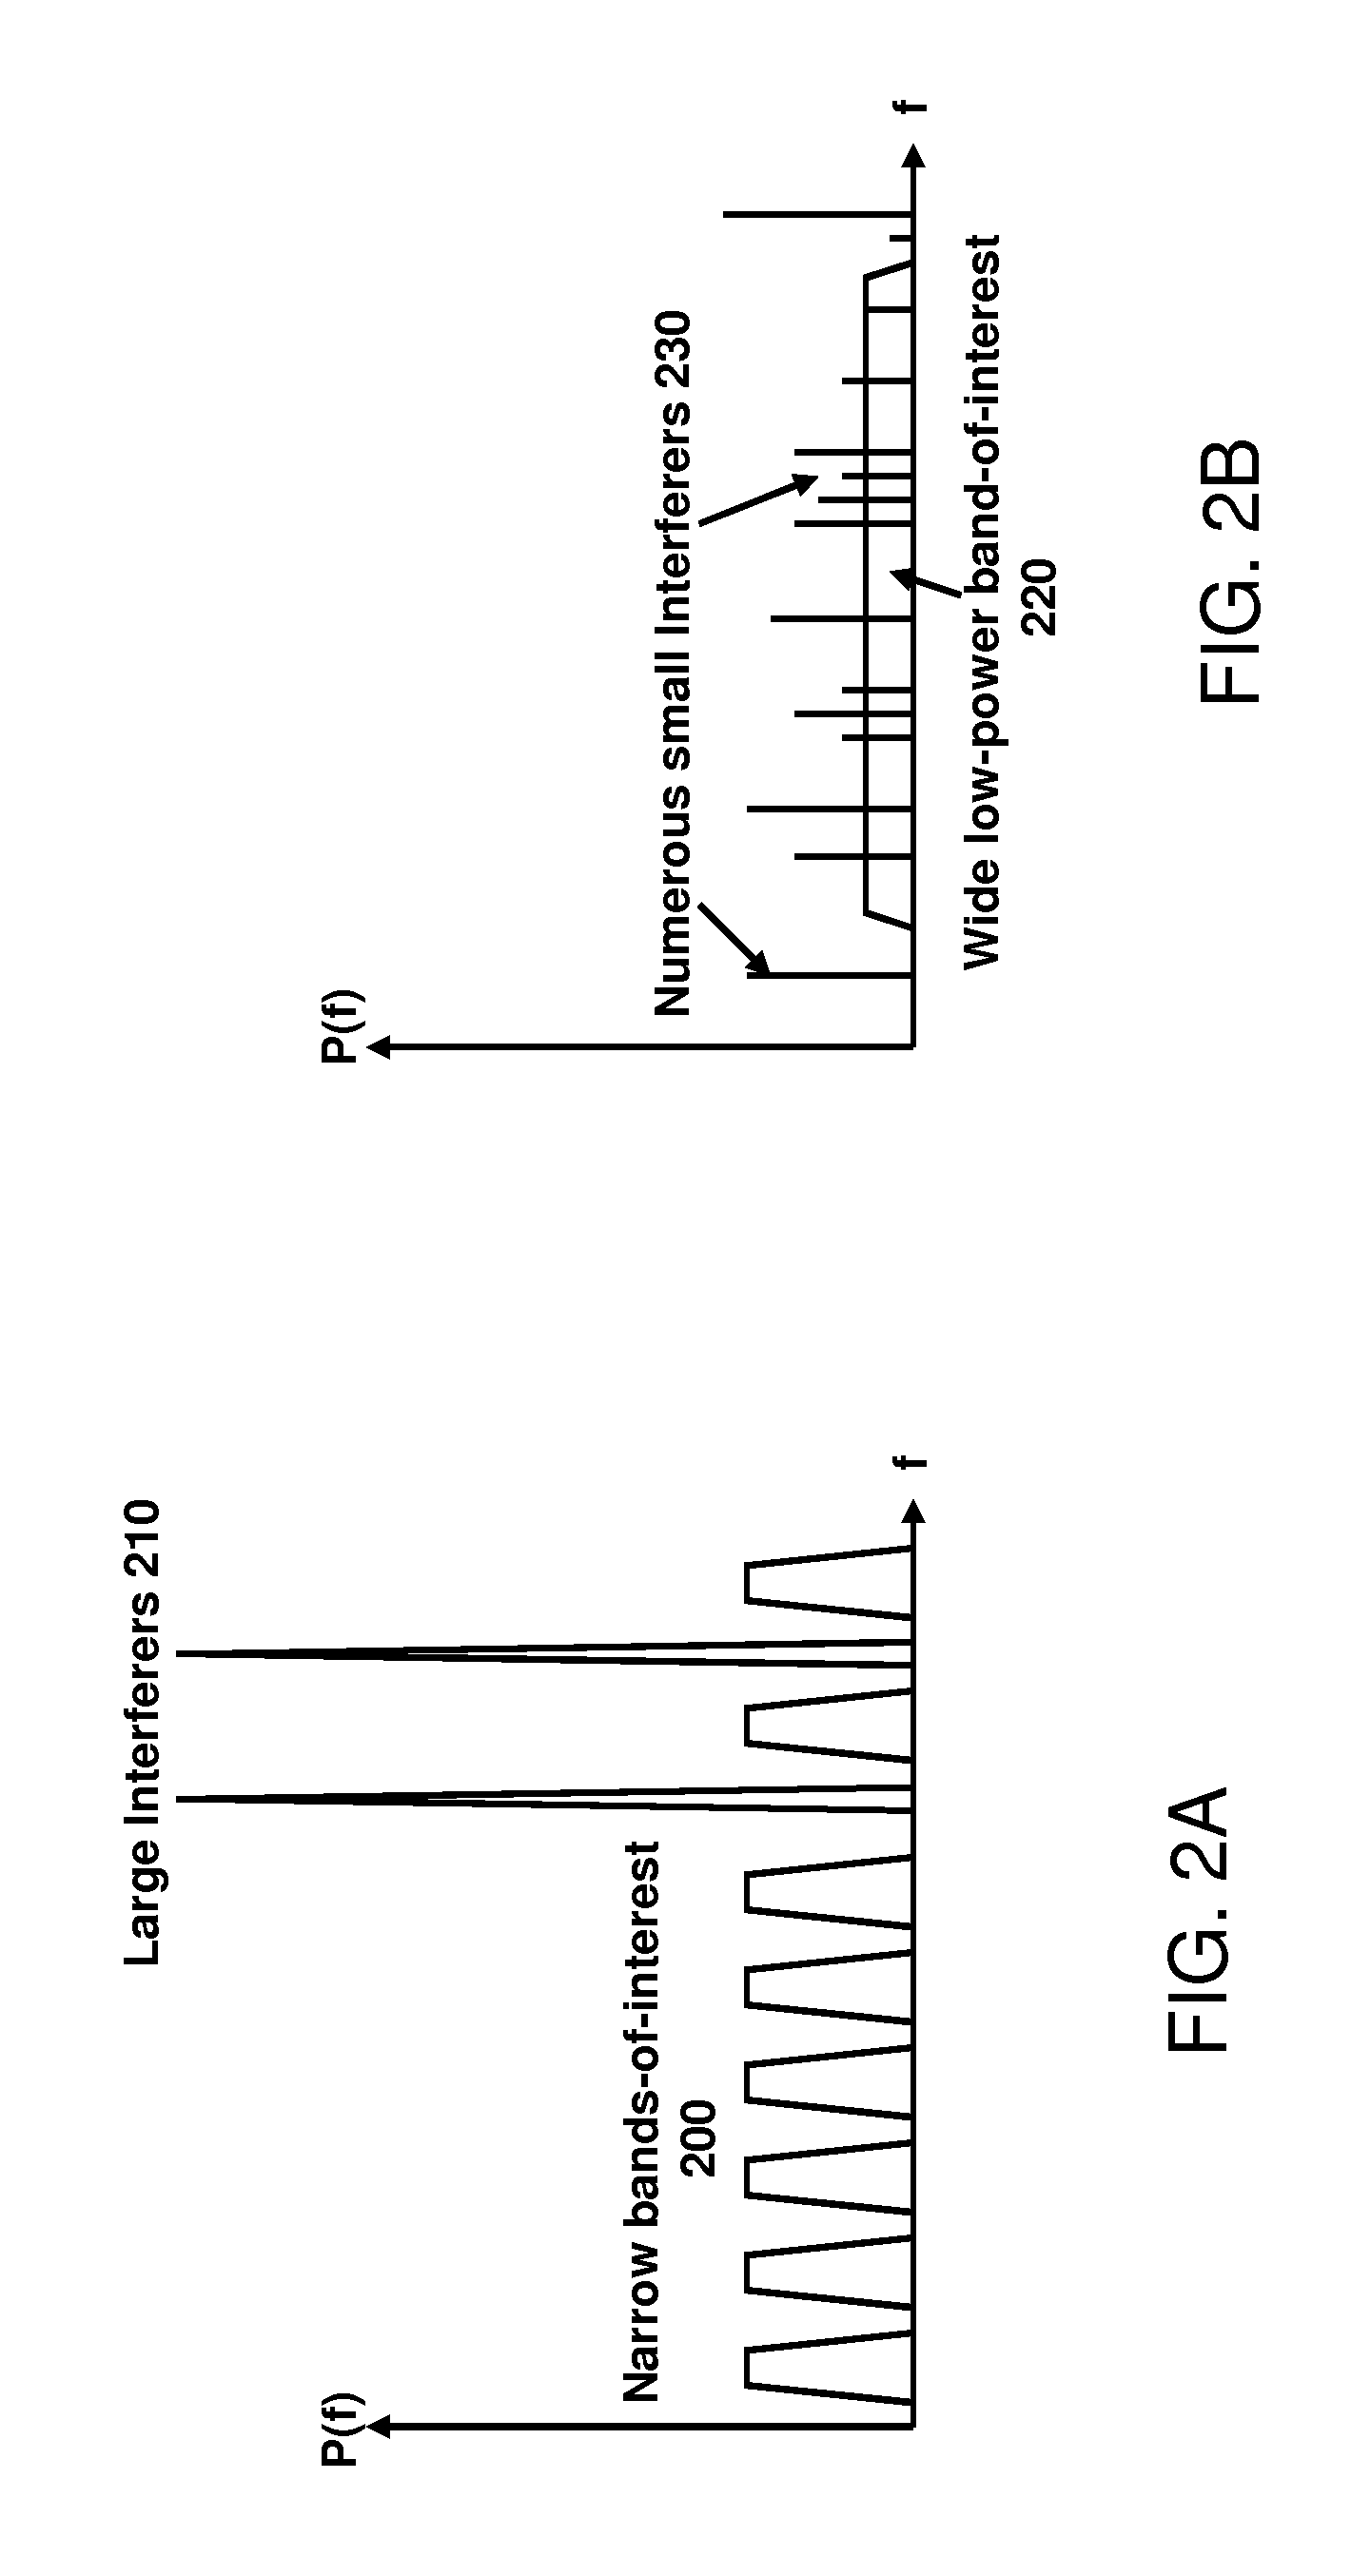 System and method for digital interference cancellation